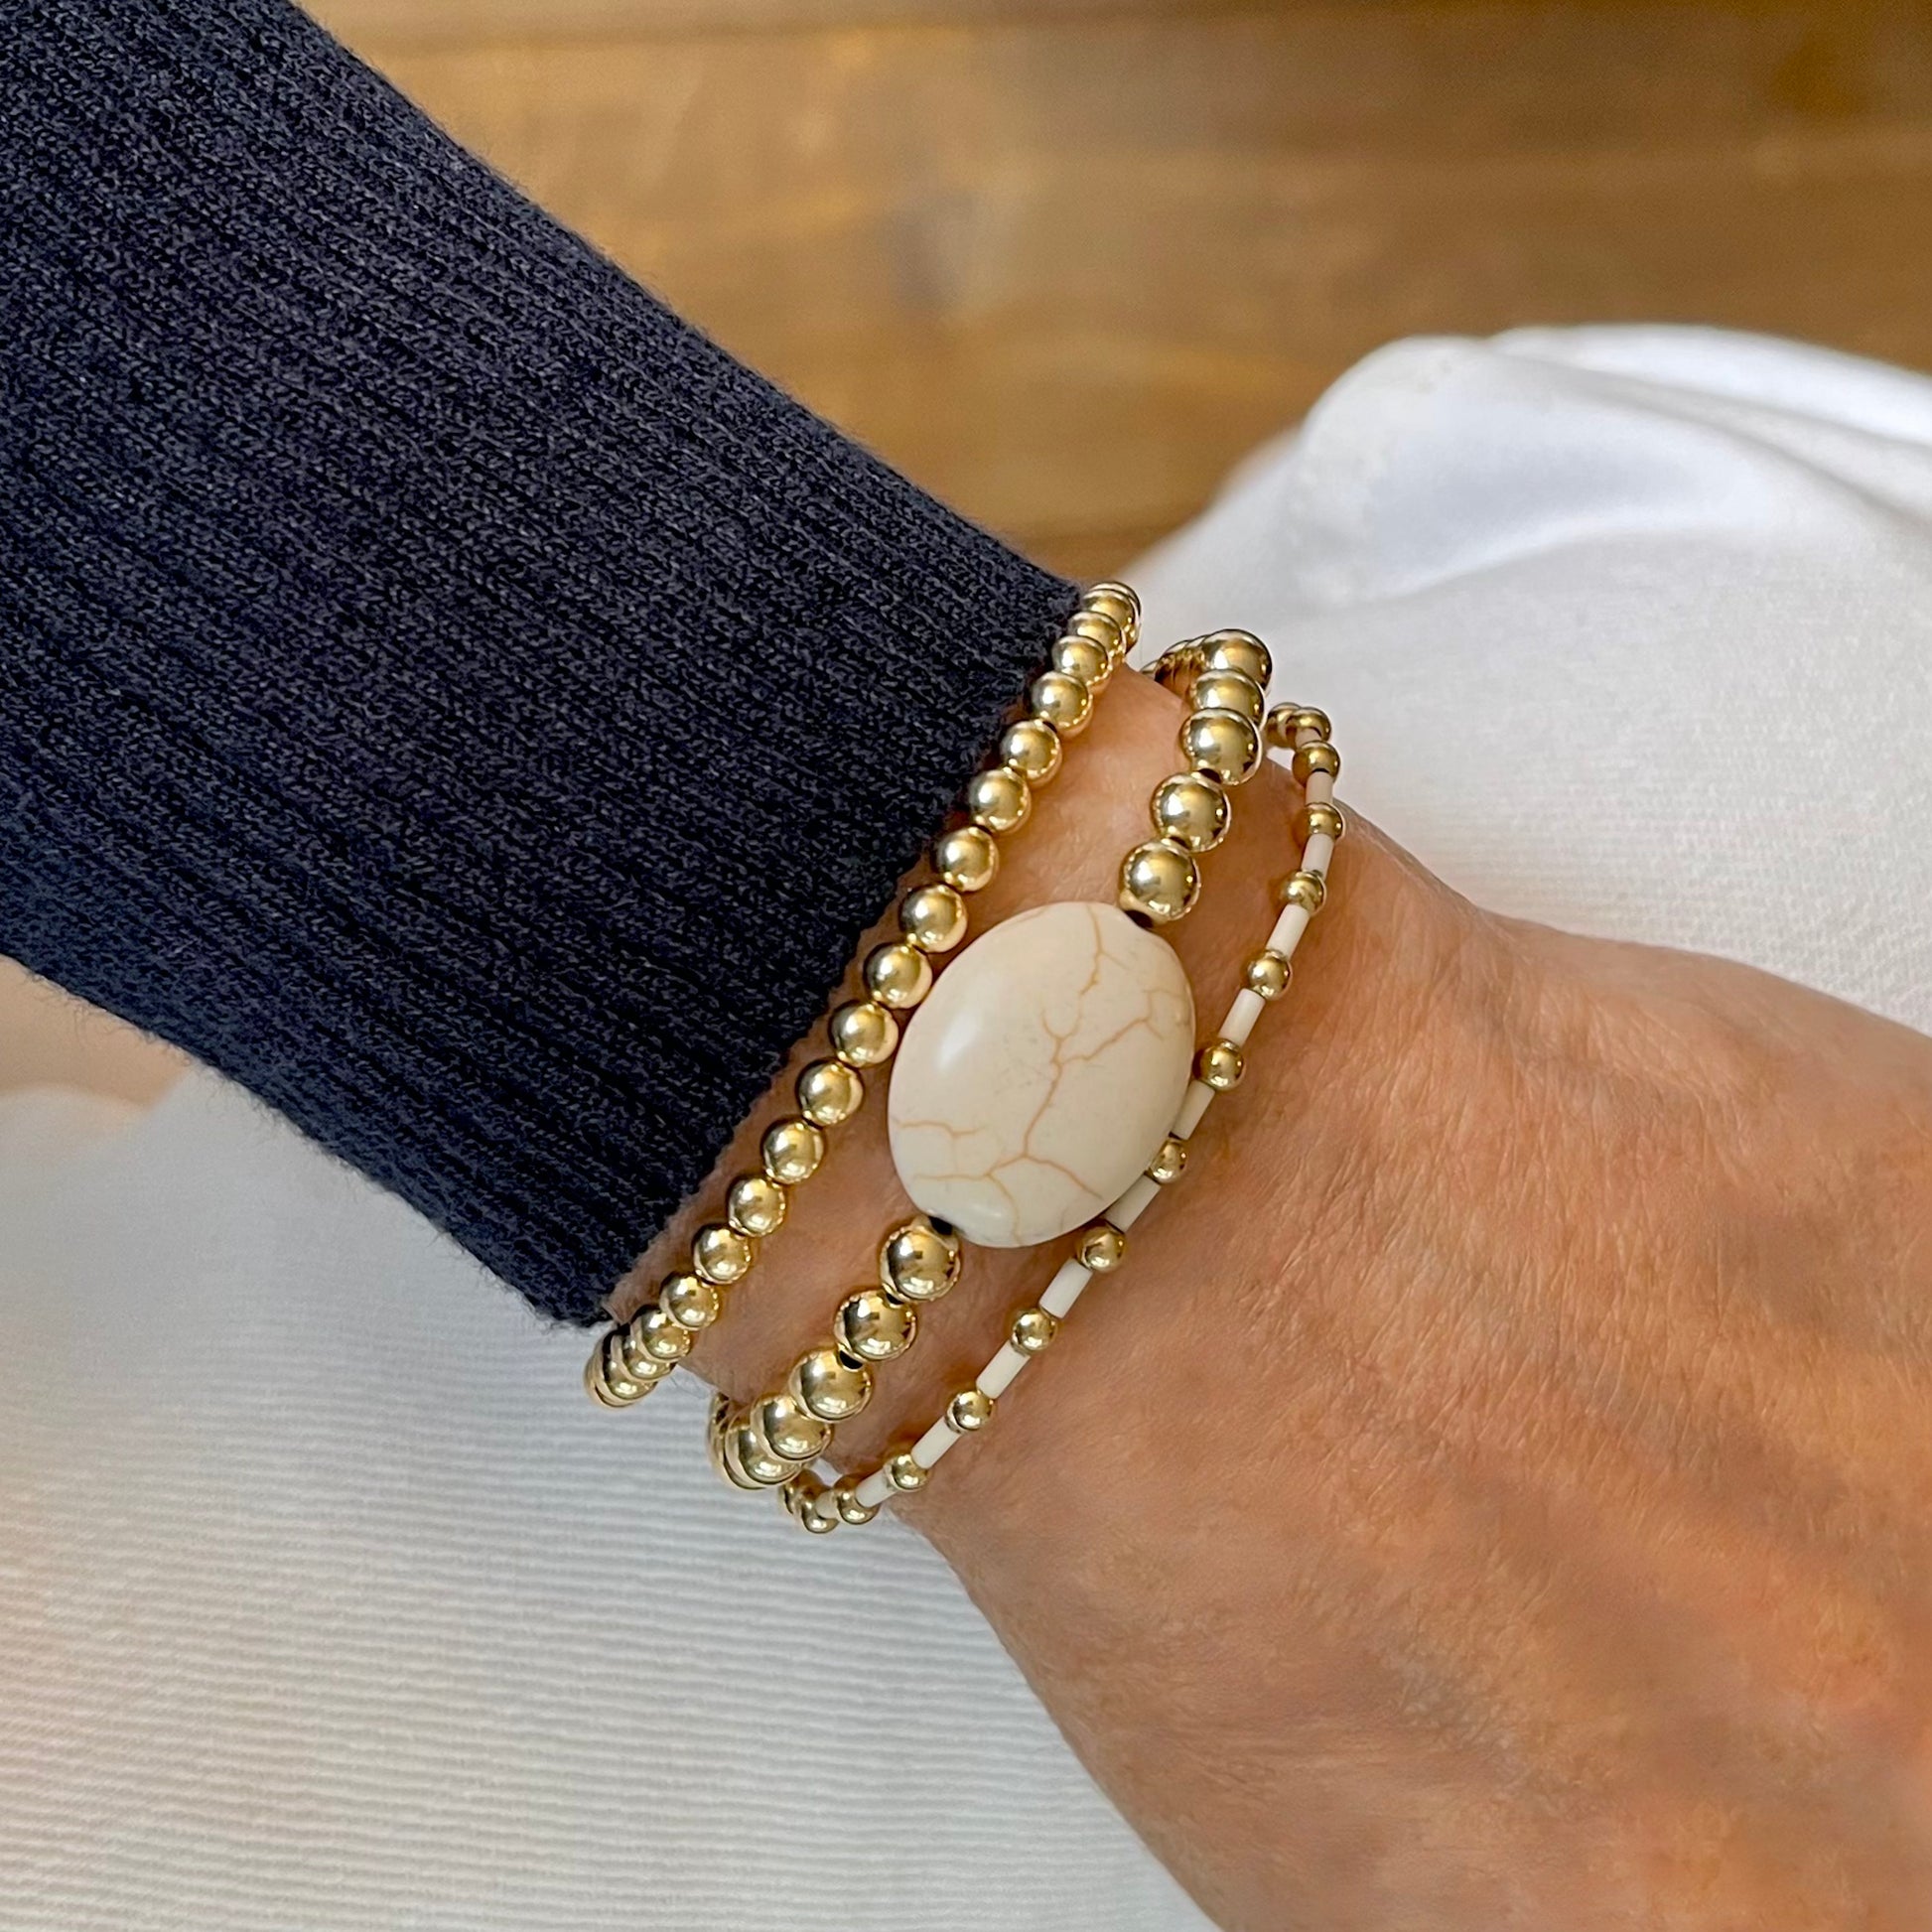 Gold ball bracelet stack of 3 with puff oval magnesite stone and white bugle beads on elastic stretch cord.